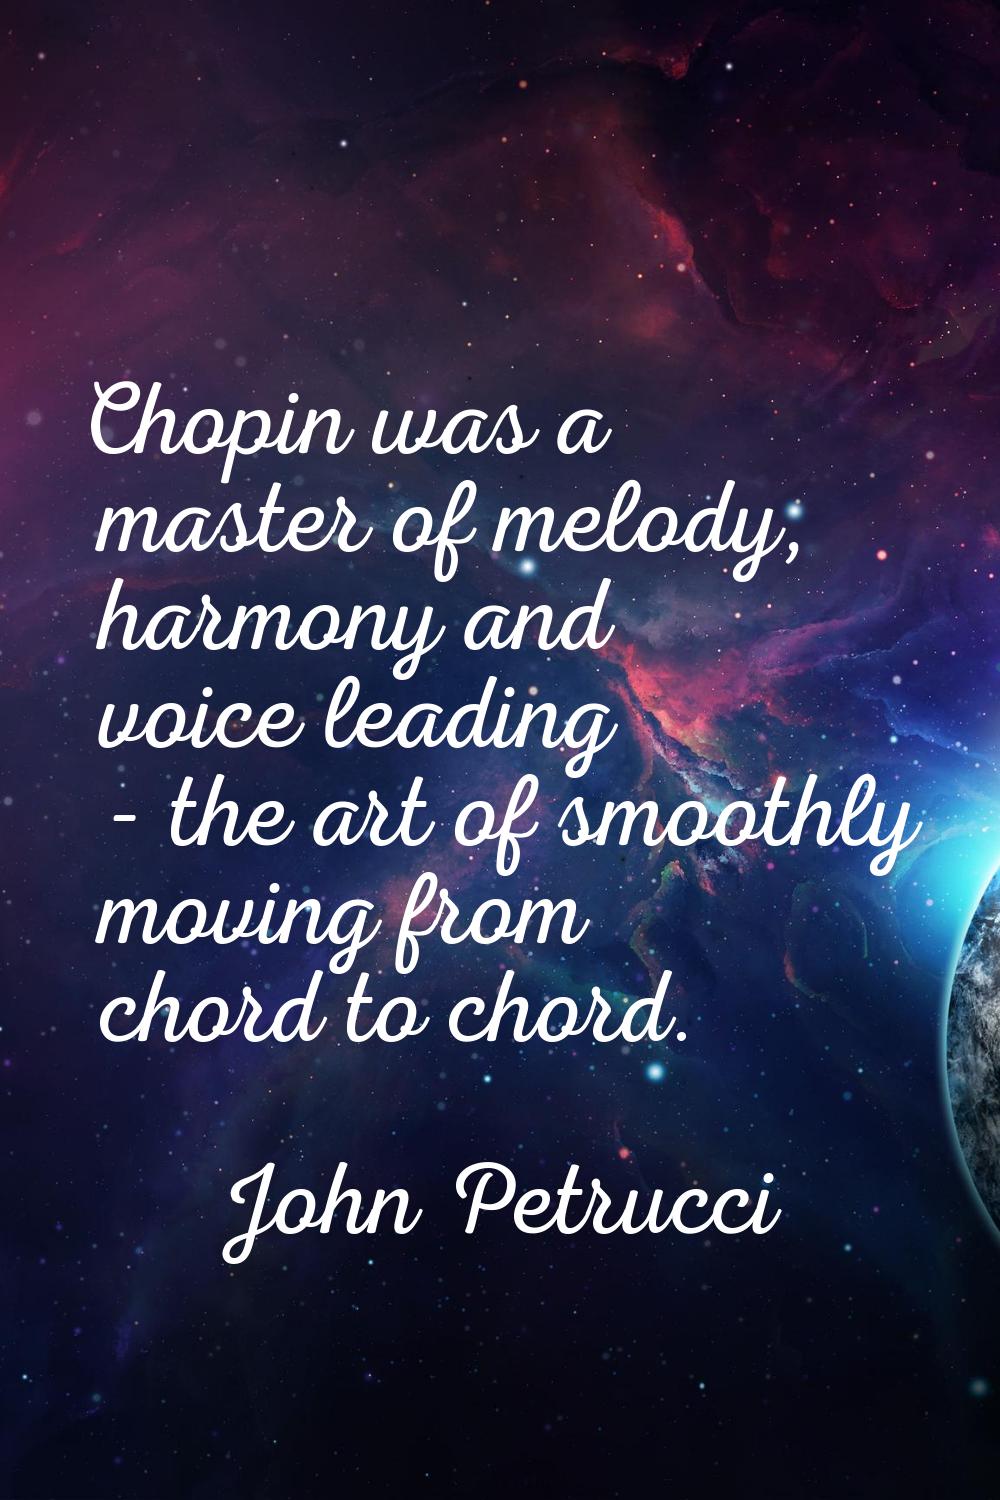 Chopin was a master of melody, harmony and voice leading - the art of smoothly moving from chord to